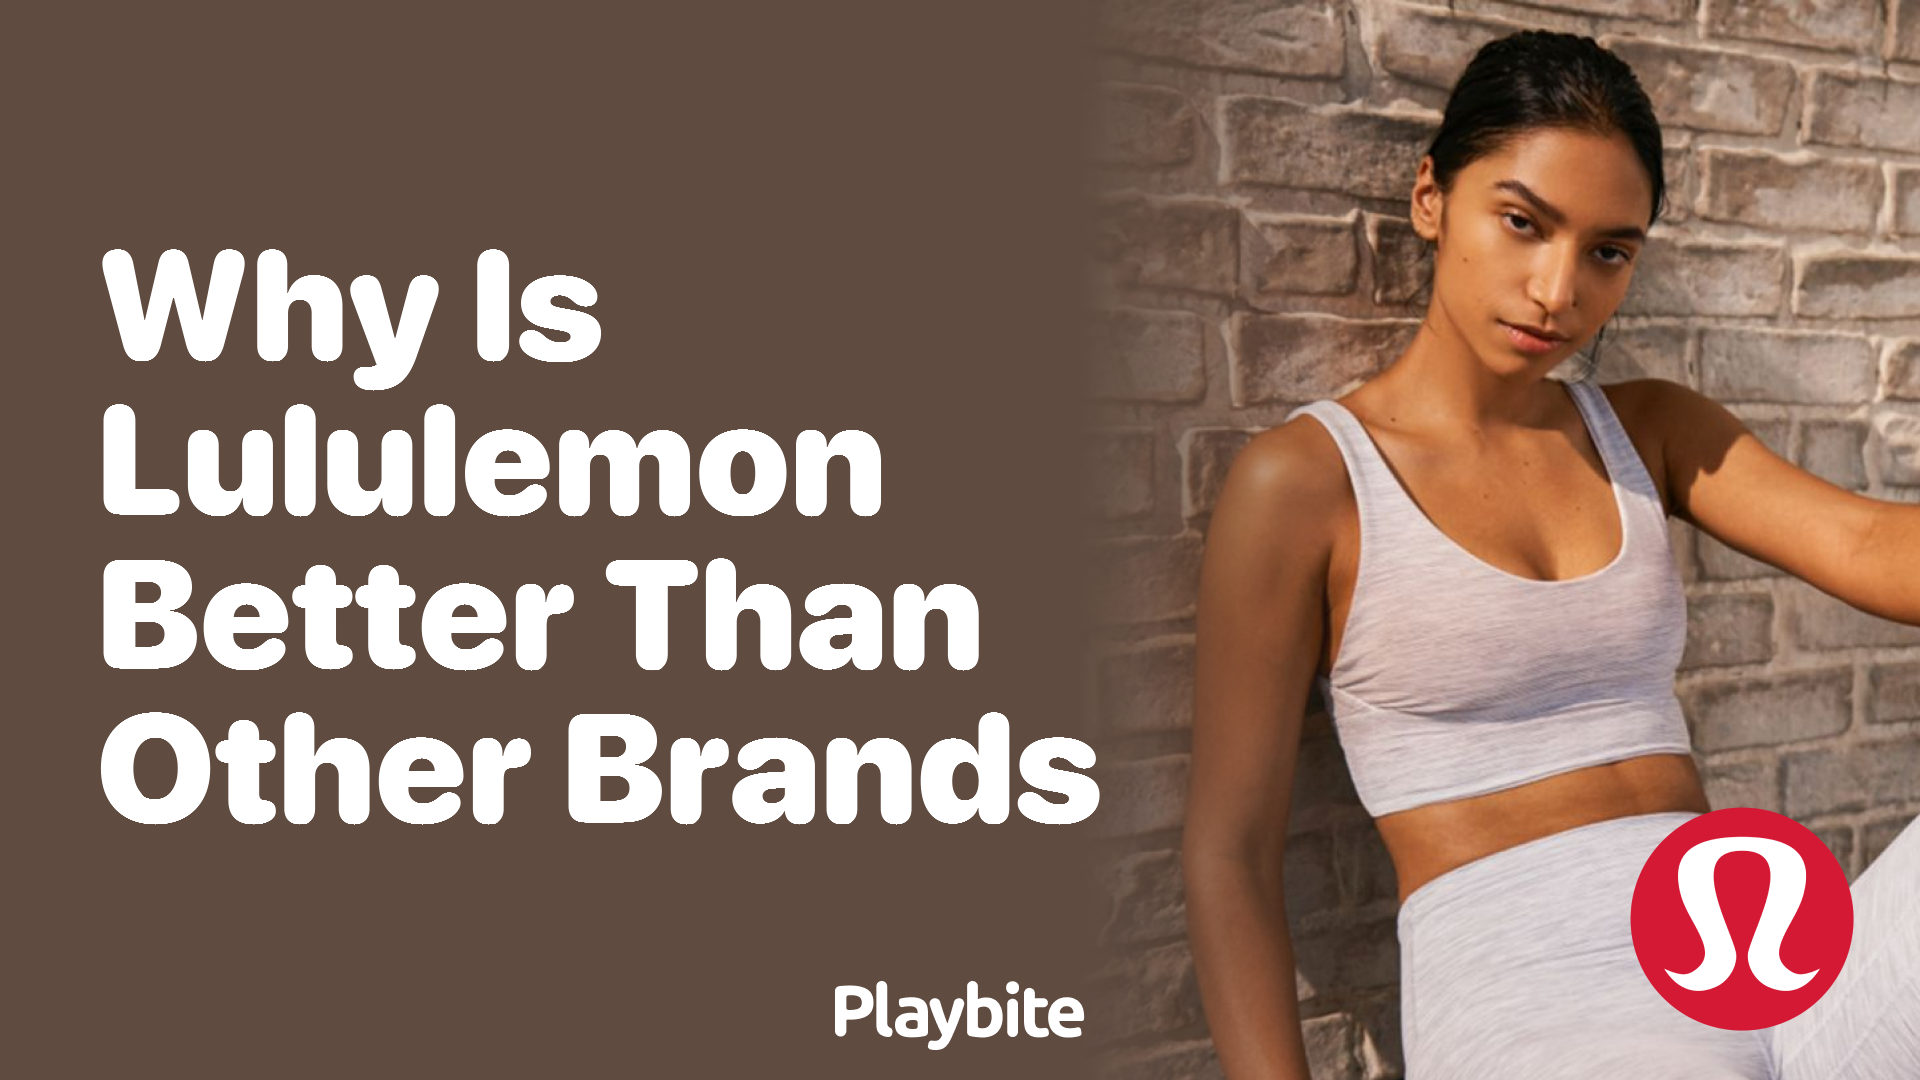 Hot Brands That Could Be Next Lululemon